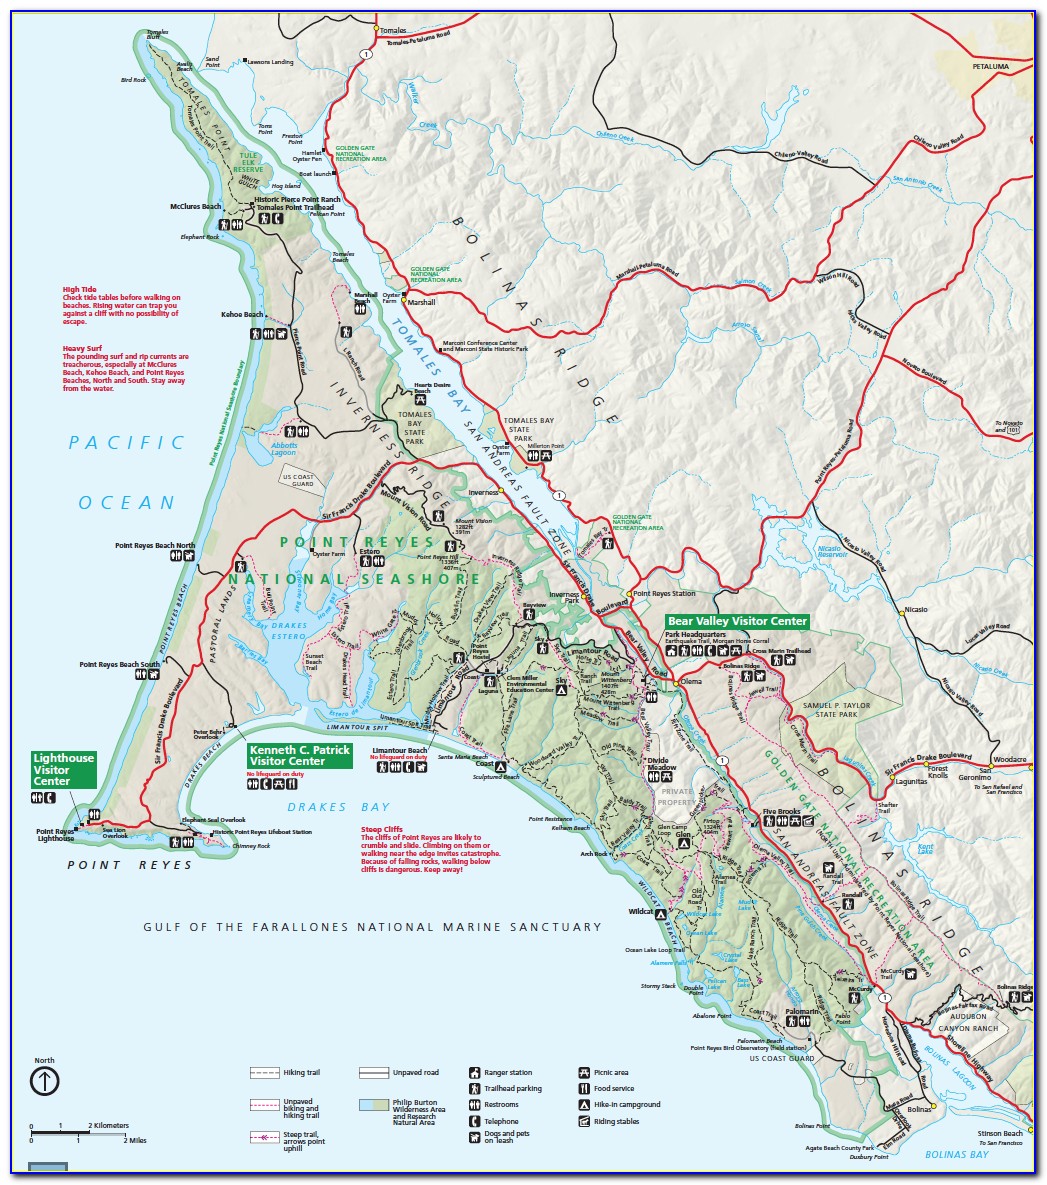 Point Reyes National Seashore Fire Map